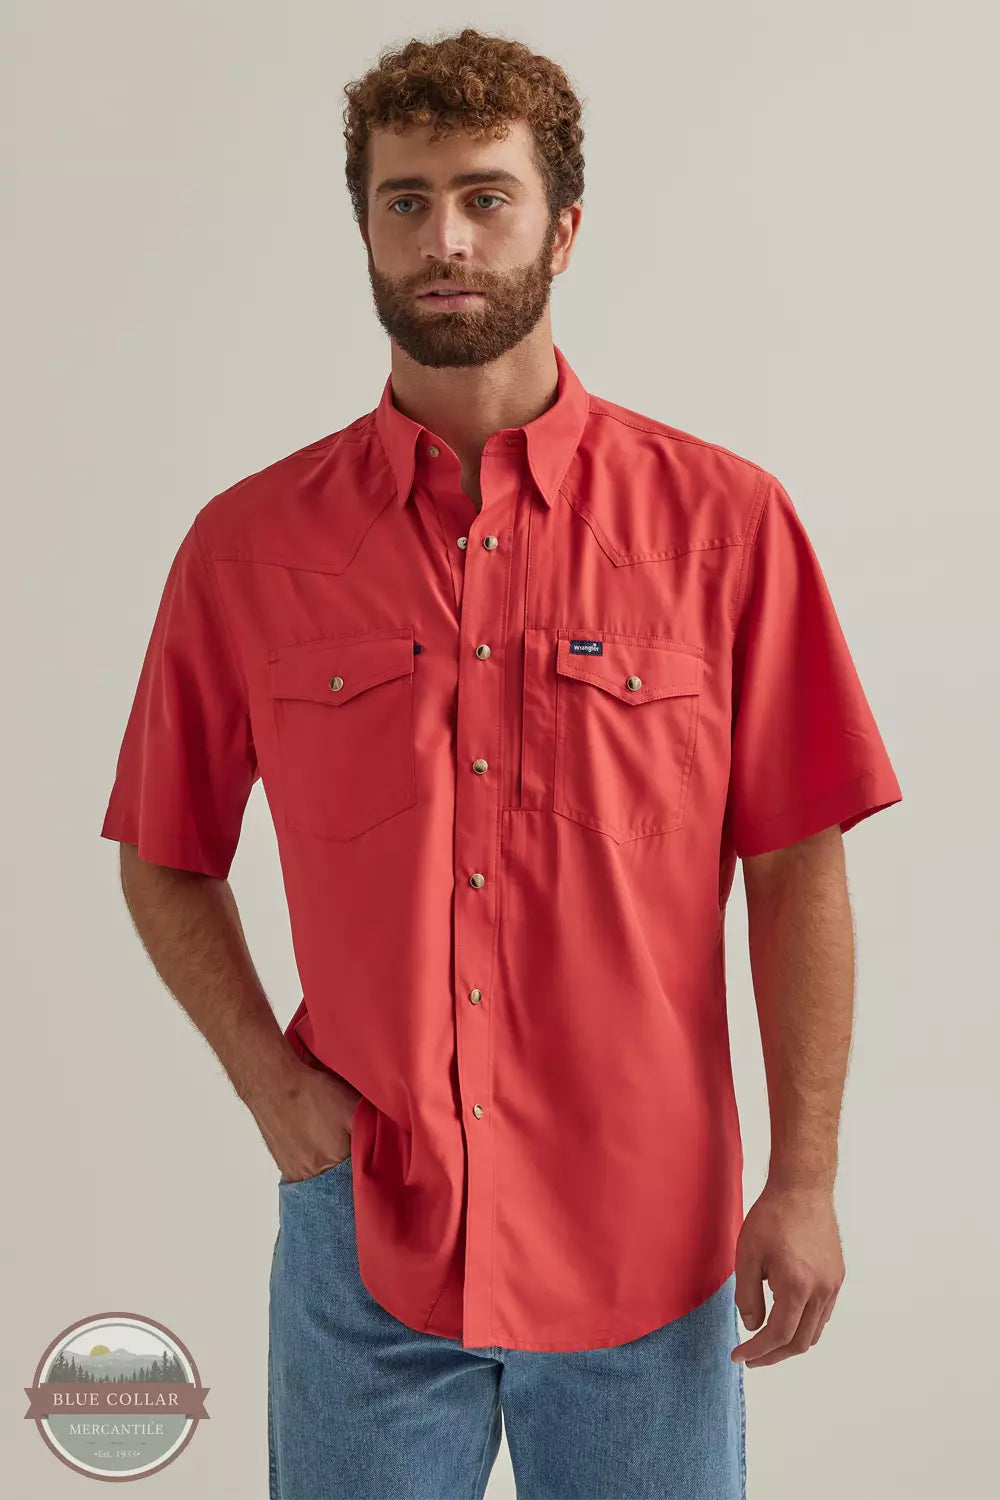 Wrangler 112344571 Performance Snap Shirt in Red Front View